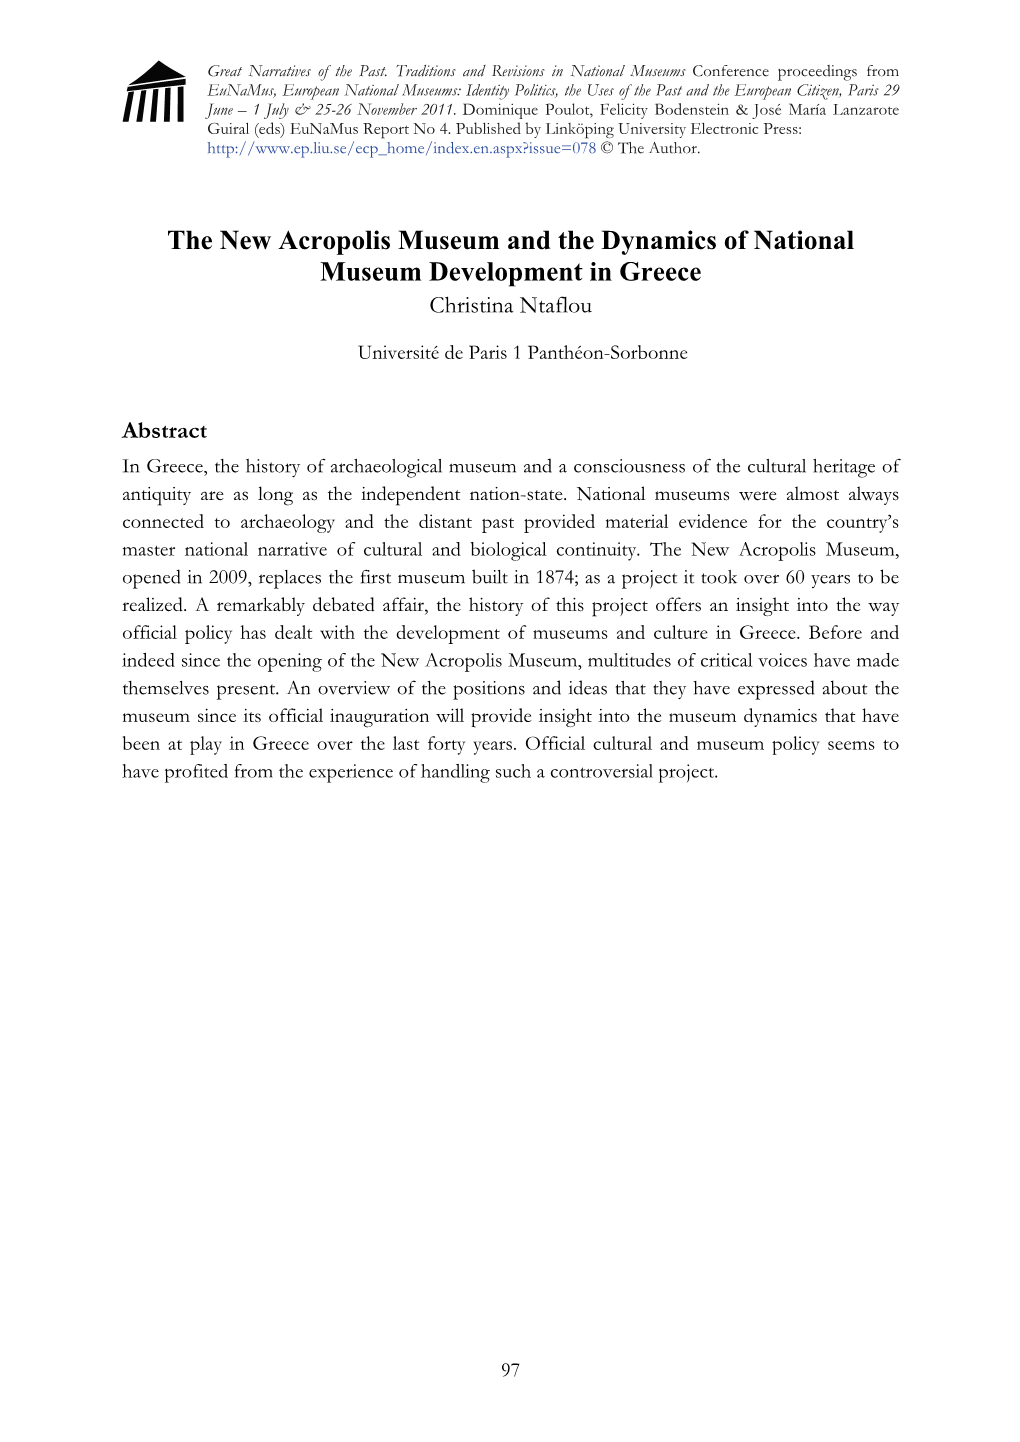 The New Acropolis Museum and the Dynamics of National Museum Development in Greece Christina Ntaflou